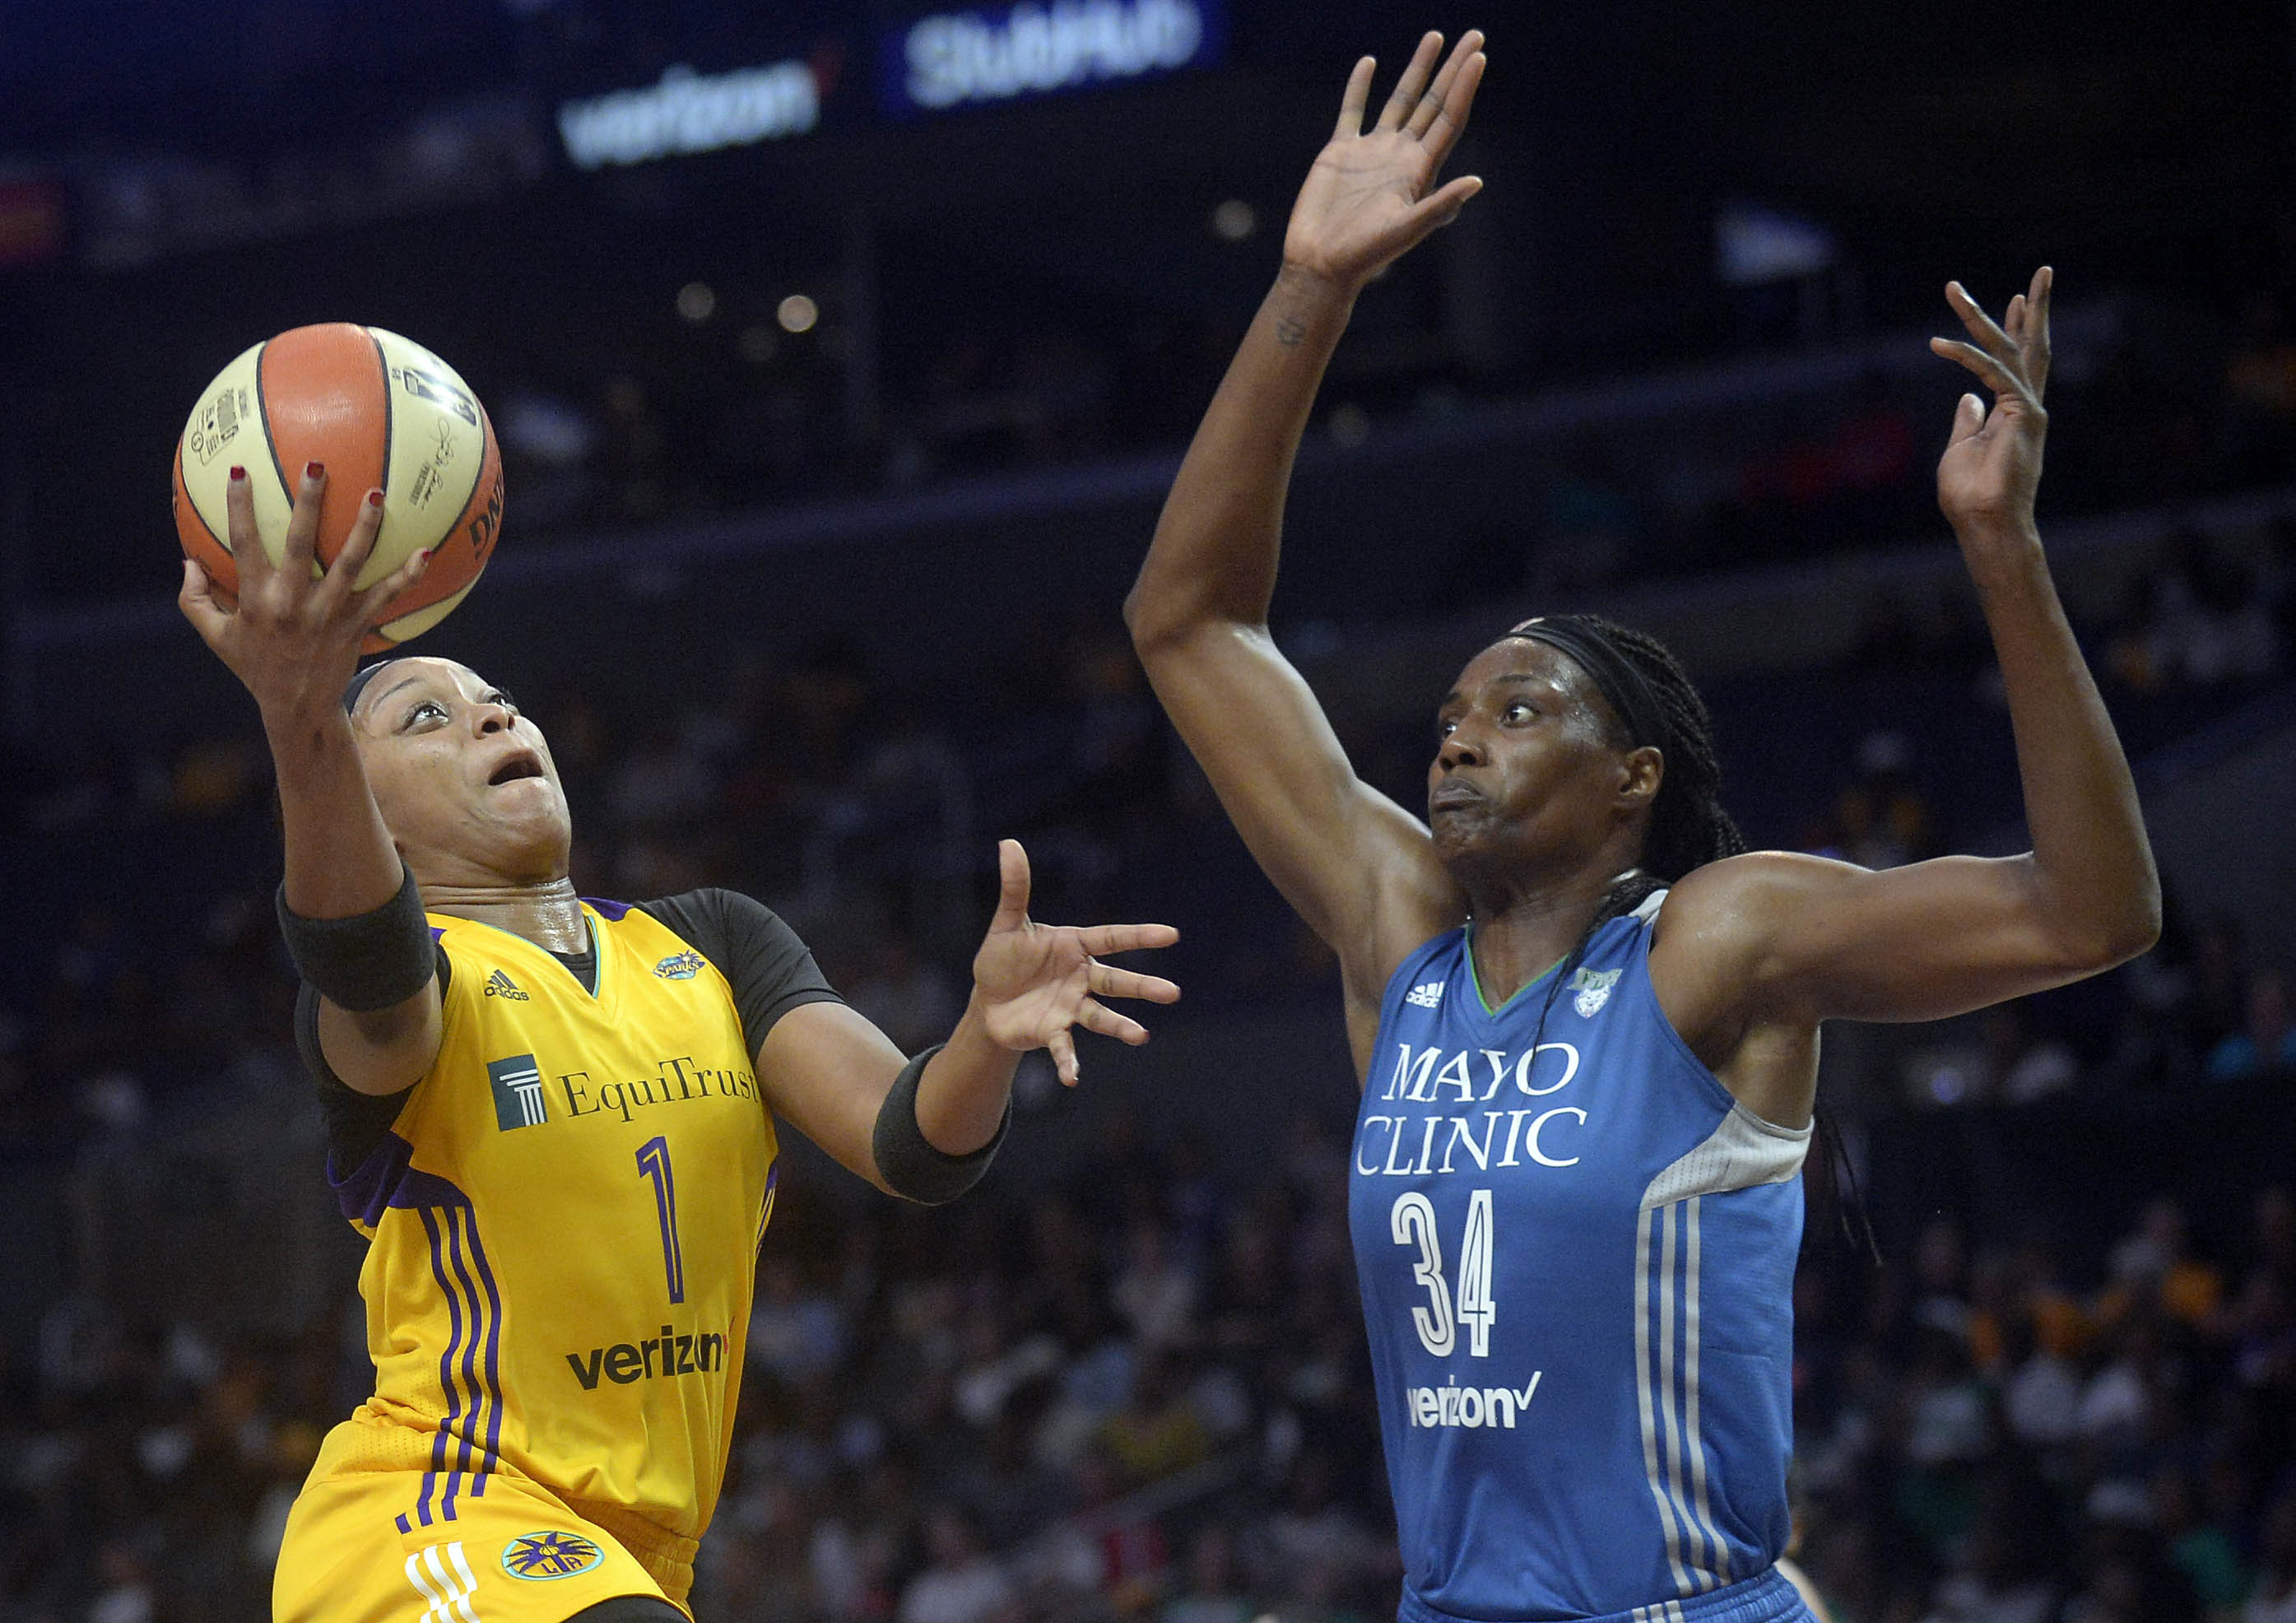 Los Angeles Sparks: Three reasons to watch the Sparks this year